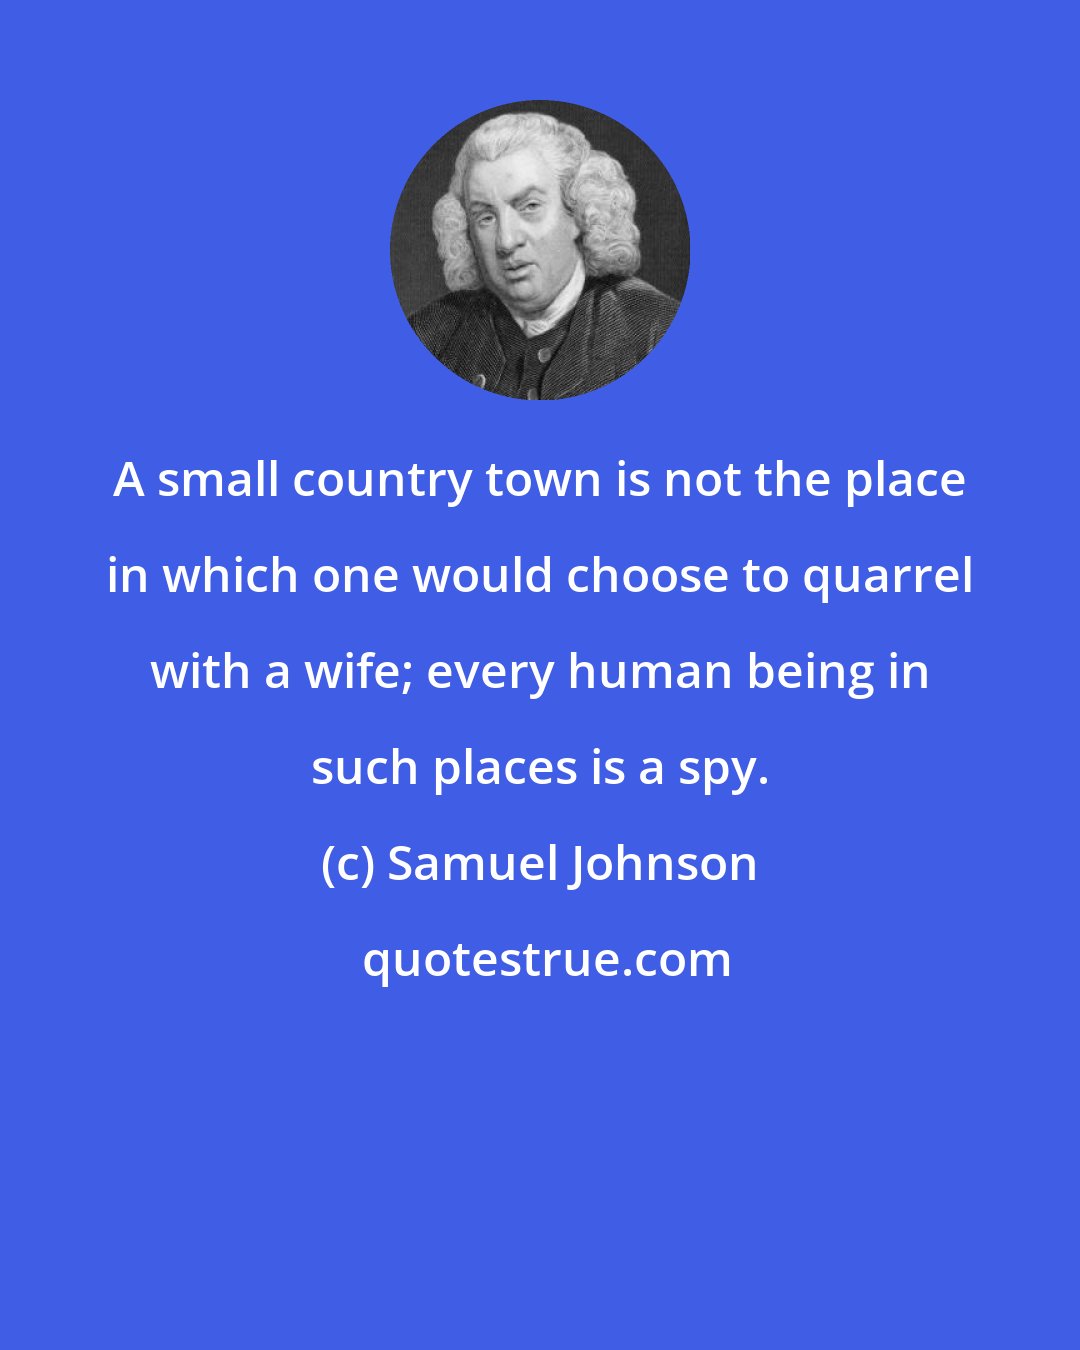 Samuel Johnson: A small country town is not the place in which one would choose to quarrel with a wife; every human being in such places is a spy.